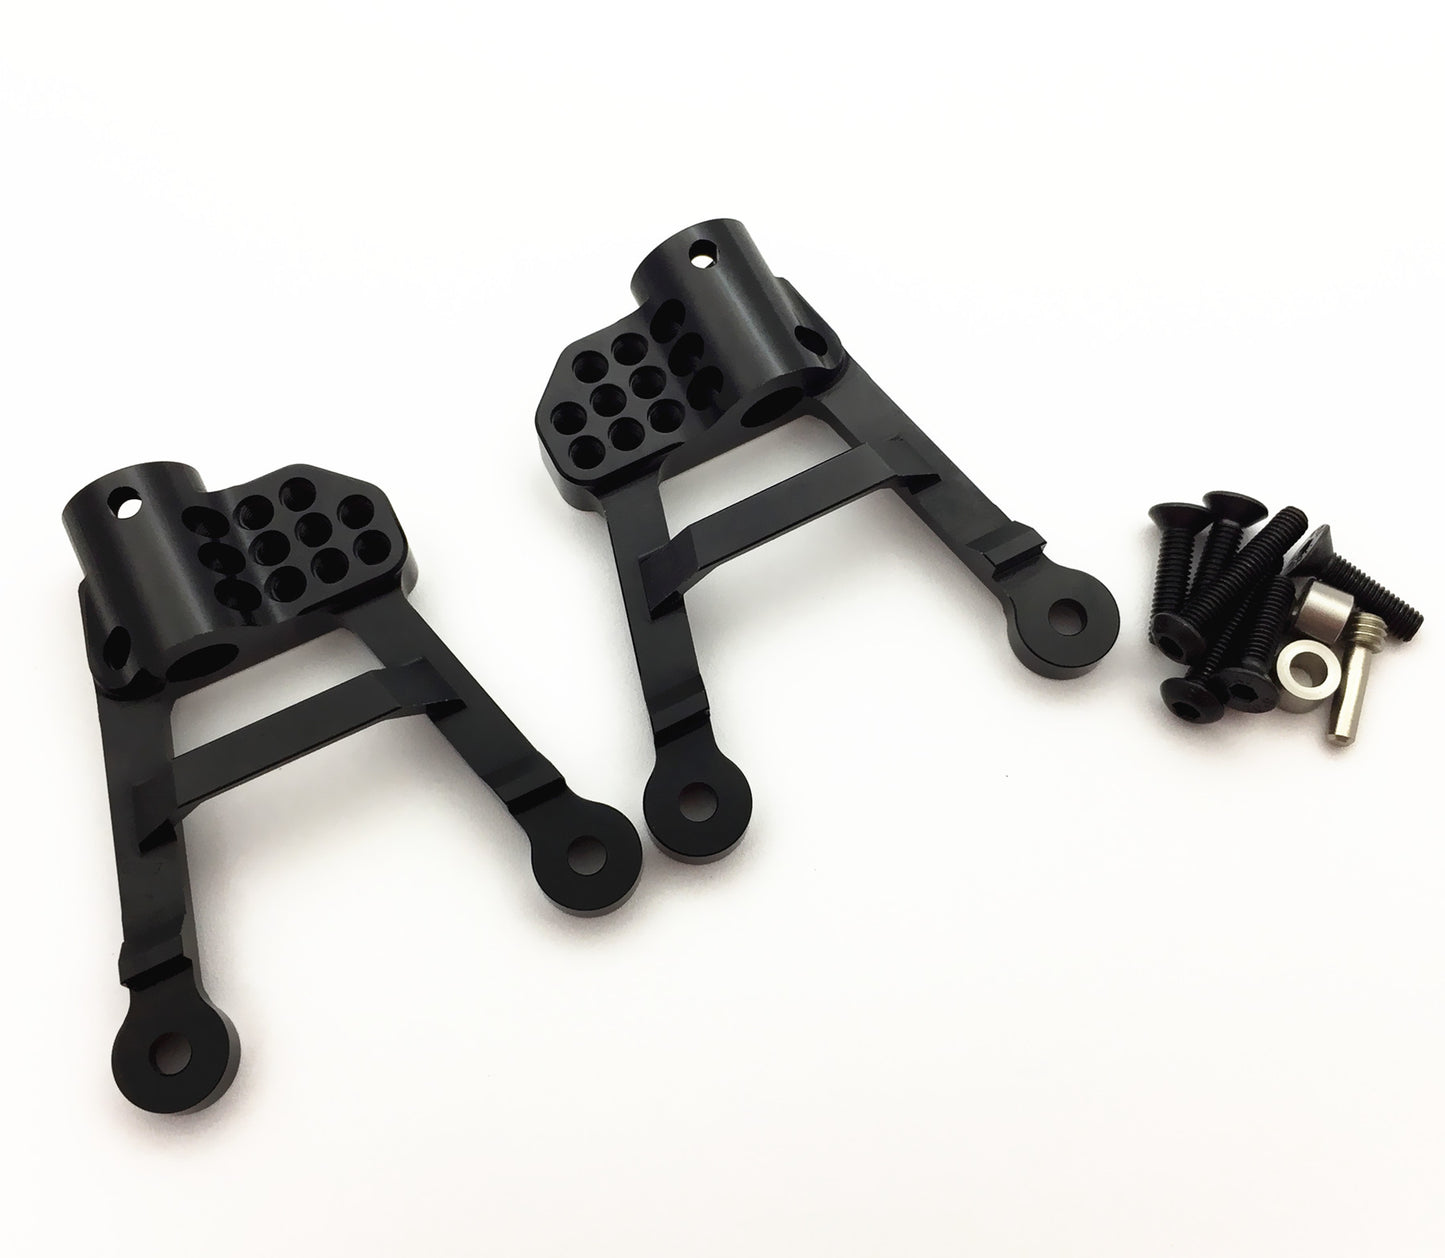 Treal Alloy Rear Shock Tower for Axial 1/10 SCX10 II